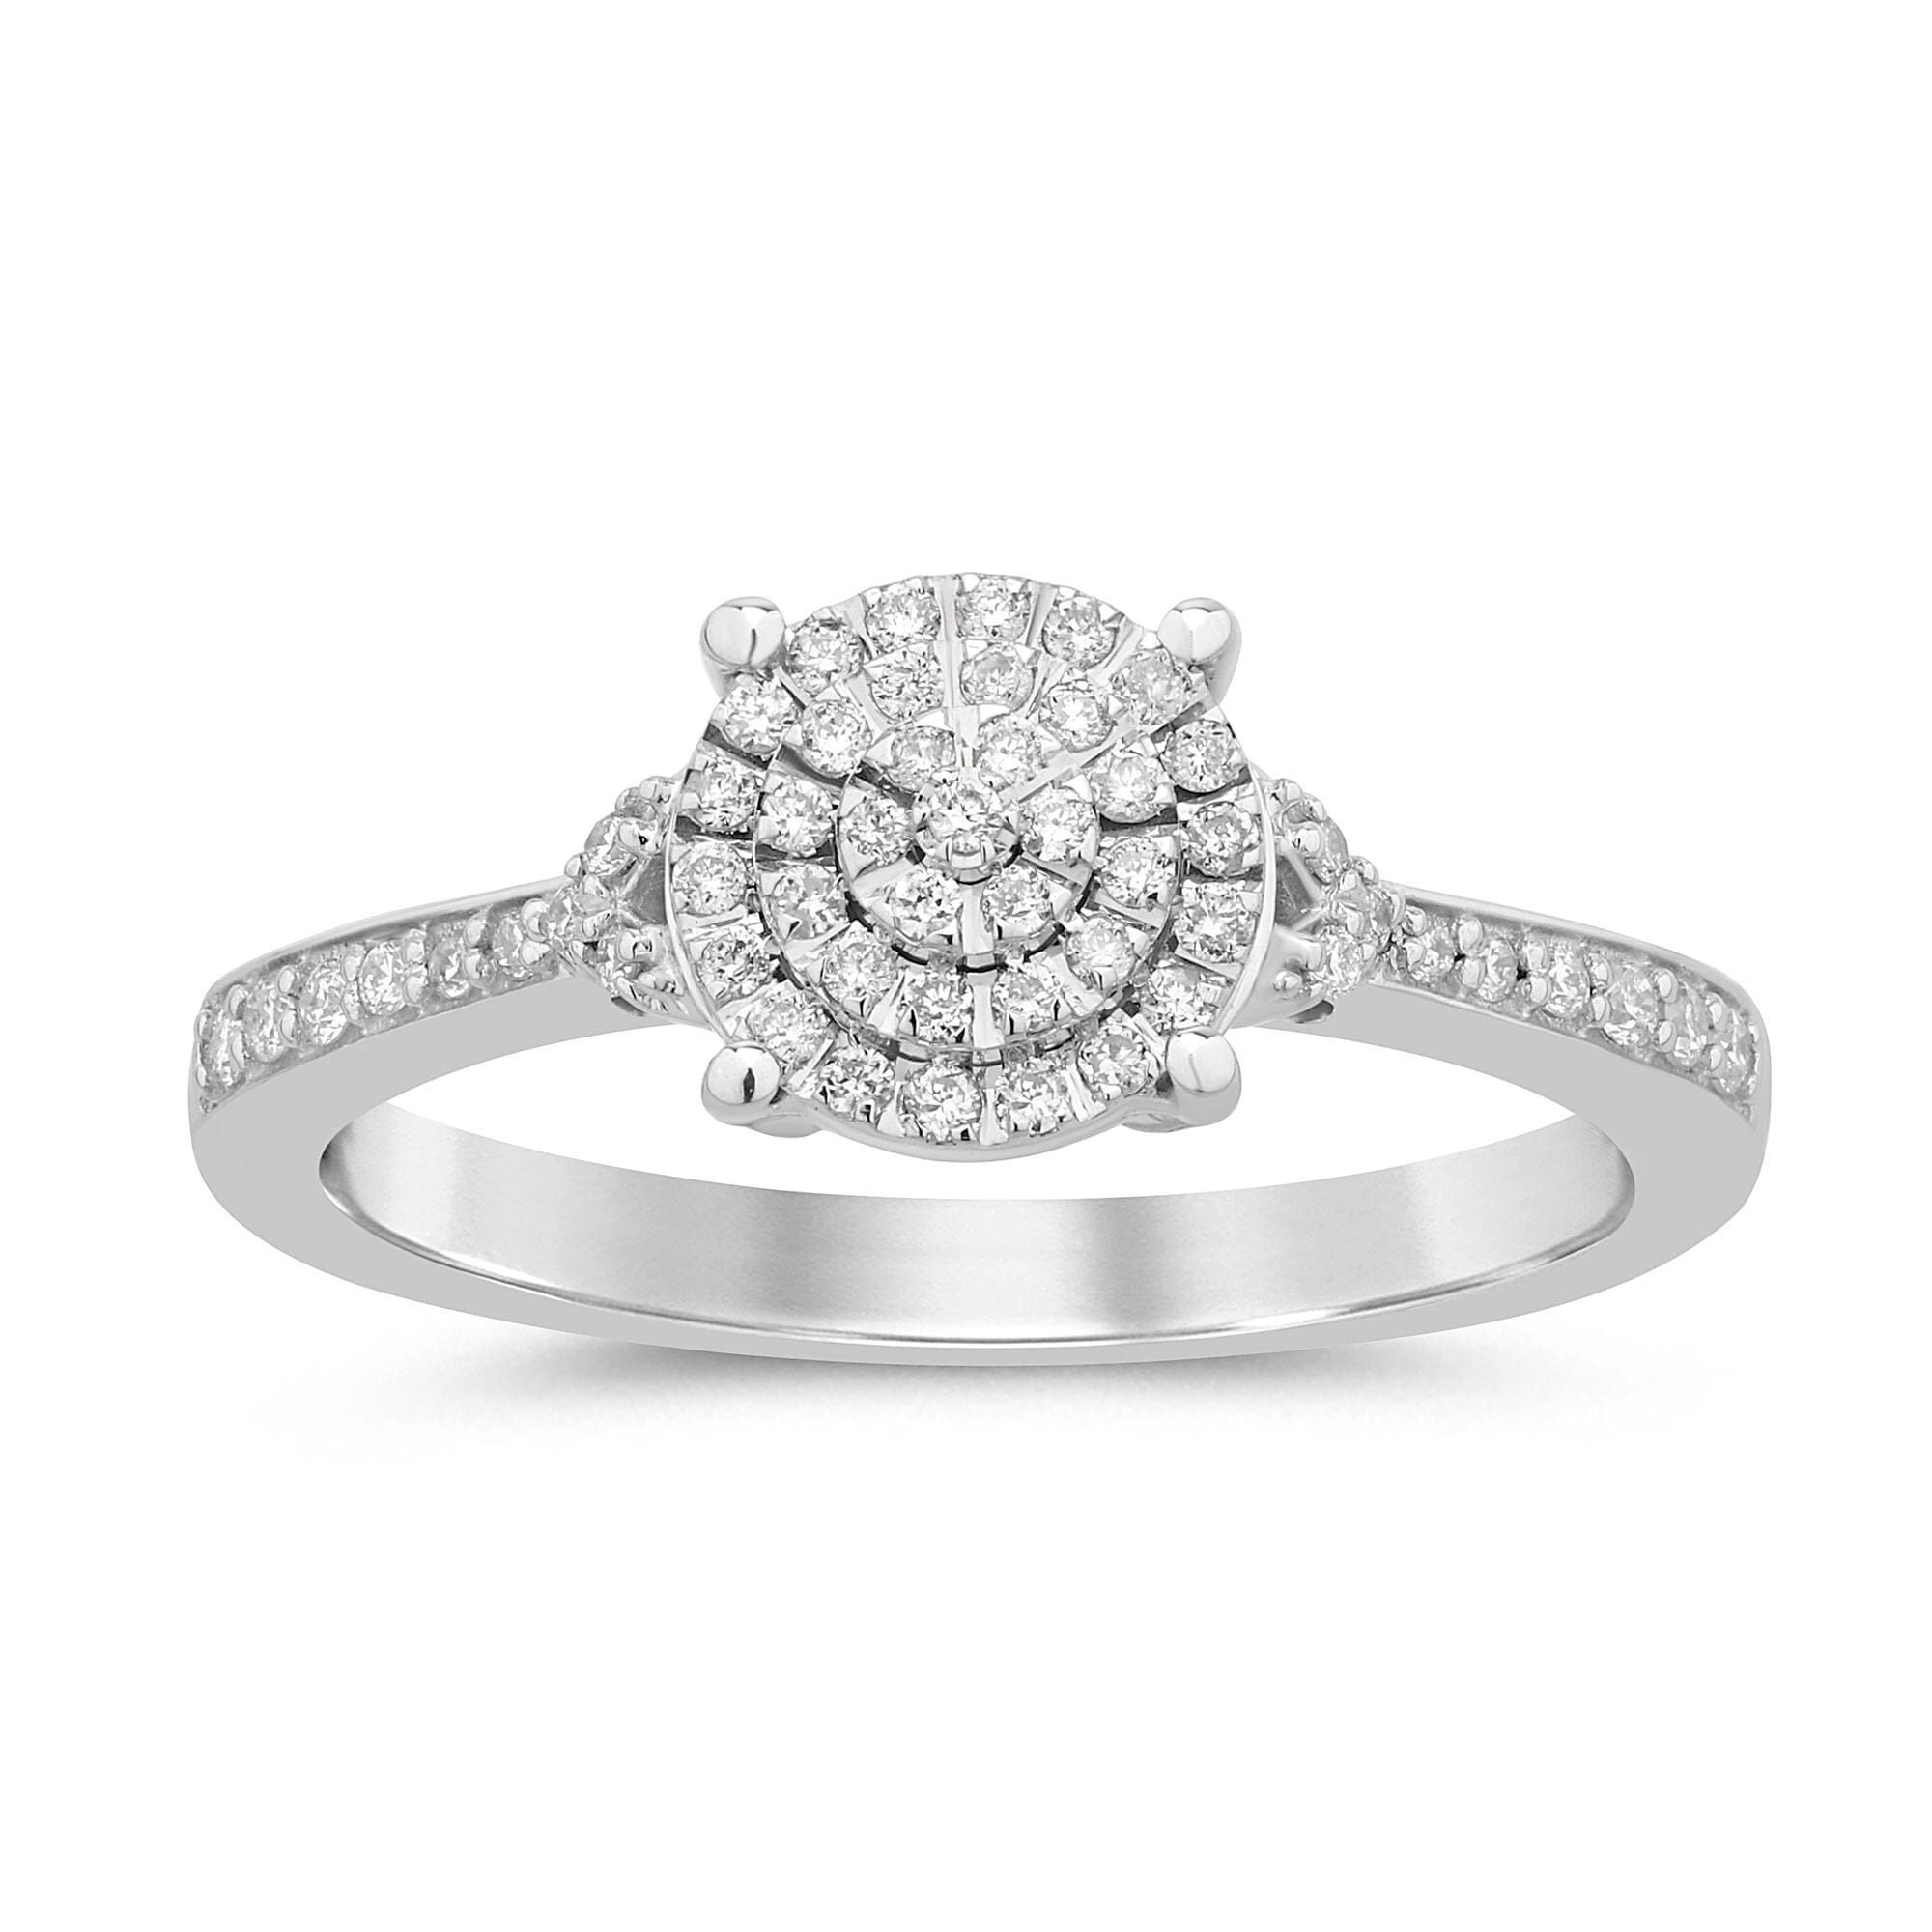 Composite Solitaire Look Ring with 1/5ct of Diamonds in Sterling Silver Rings Bevilles 